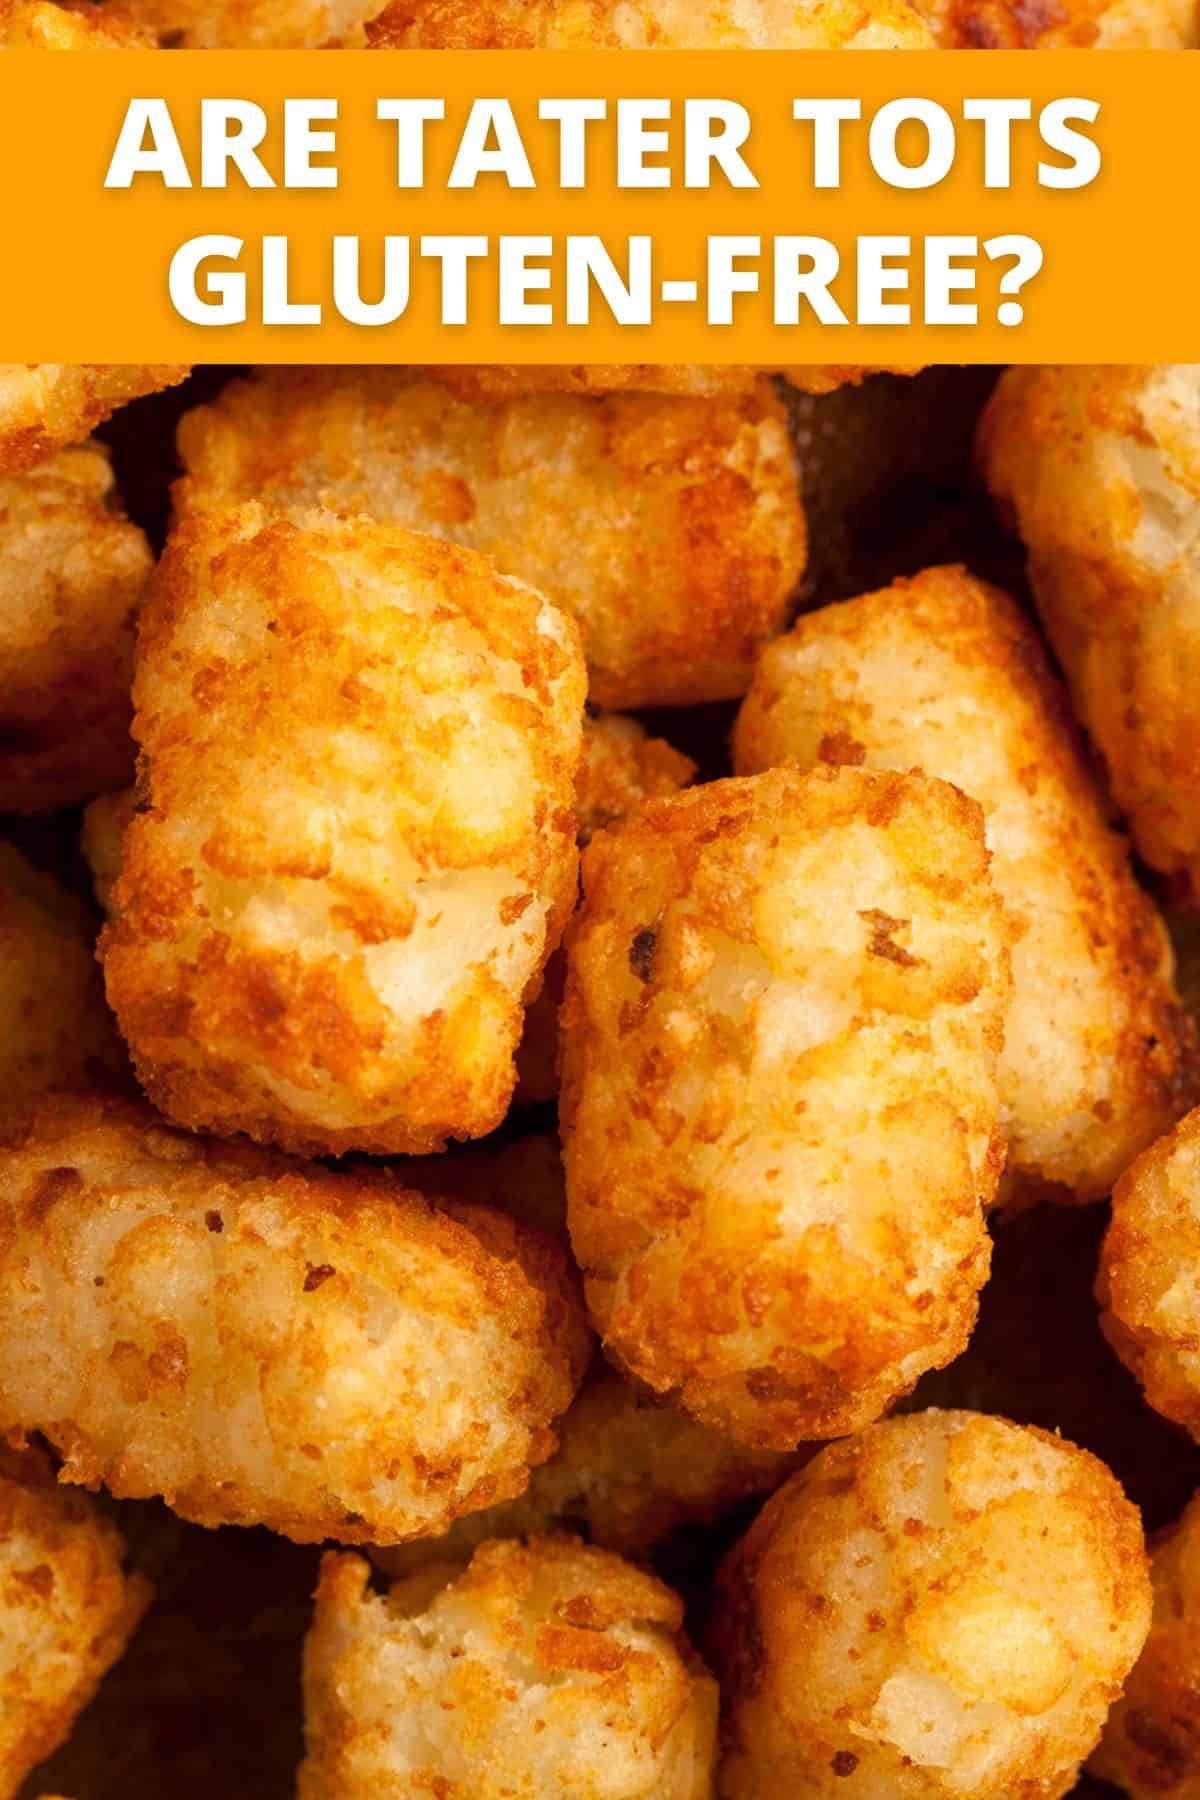 close up image of baked tater tots with text overlay saying "are tater tots gluten-free?"